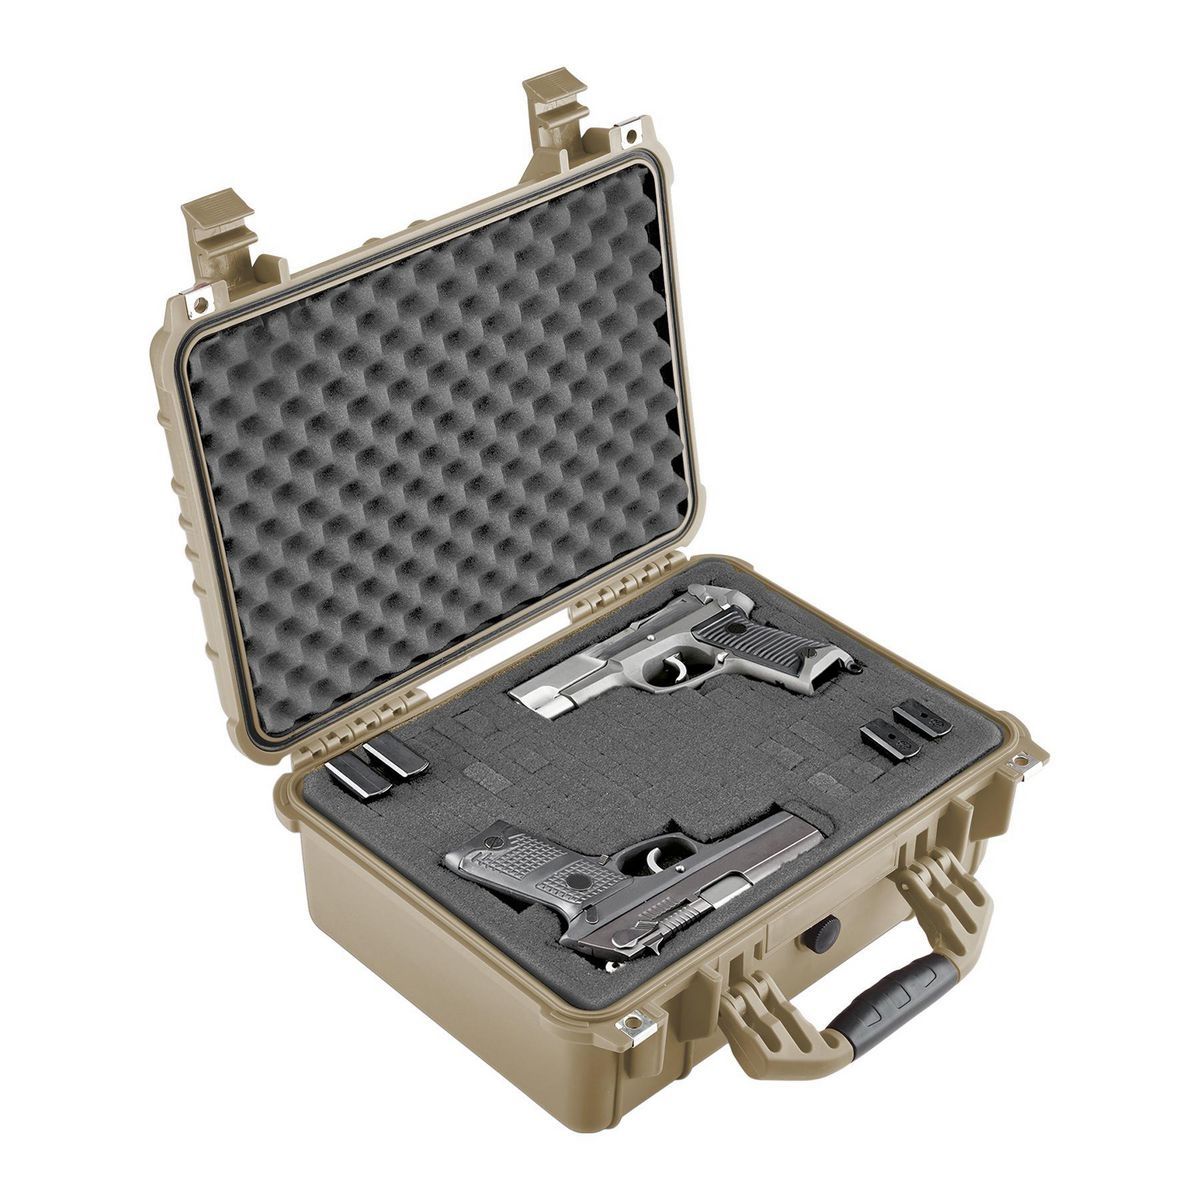 Tan Apache 3800 Weatherproof Protective Case, X-Large, Watertight, dust-tight, impact resistant protective case